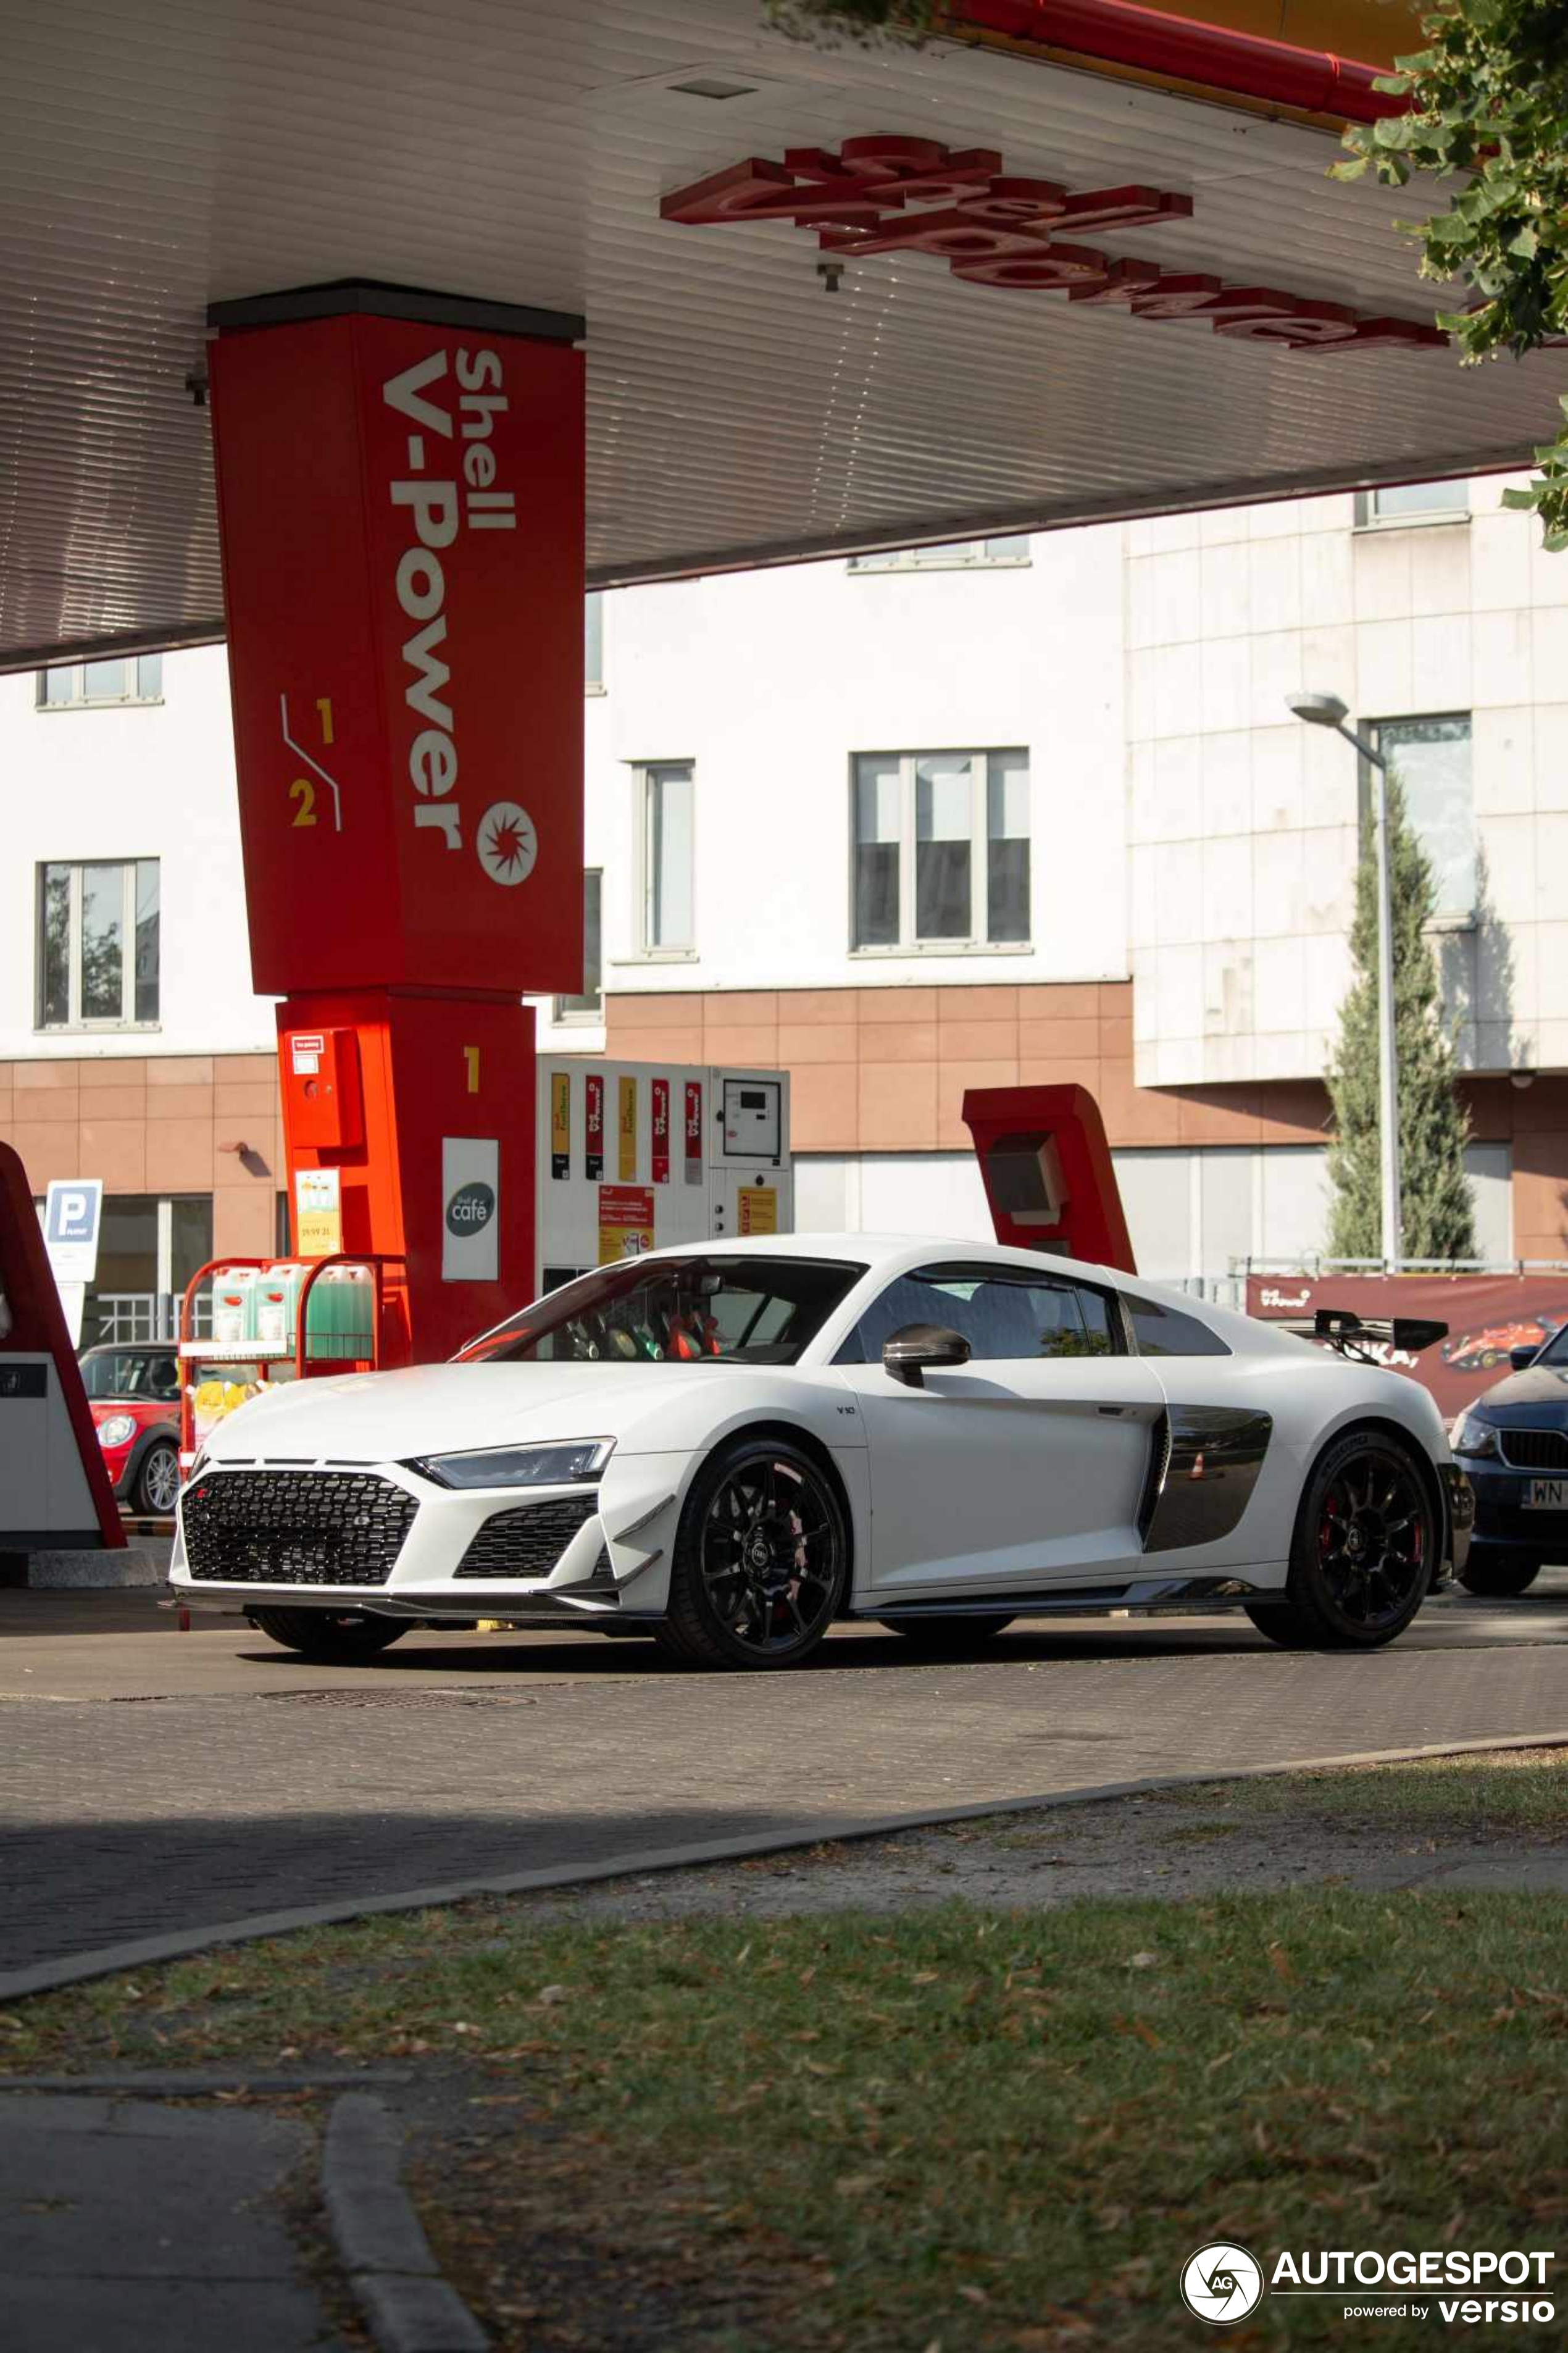 Will the new Audi R8 GT achieve the same cult status as its predecessor?